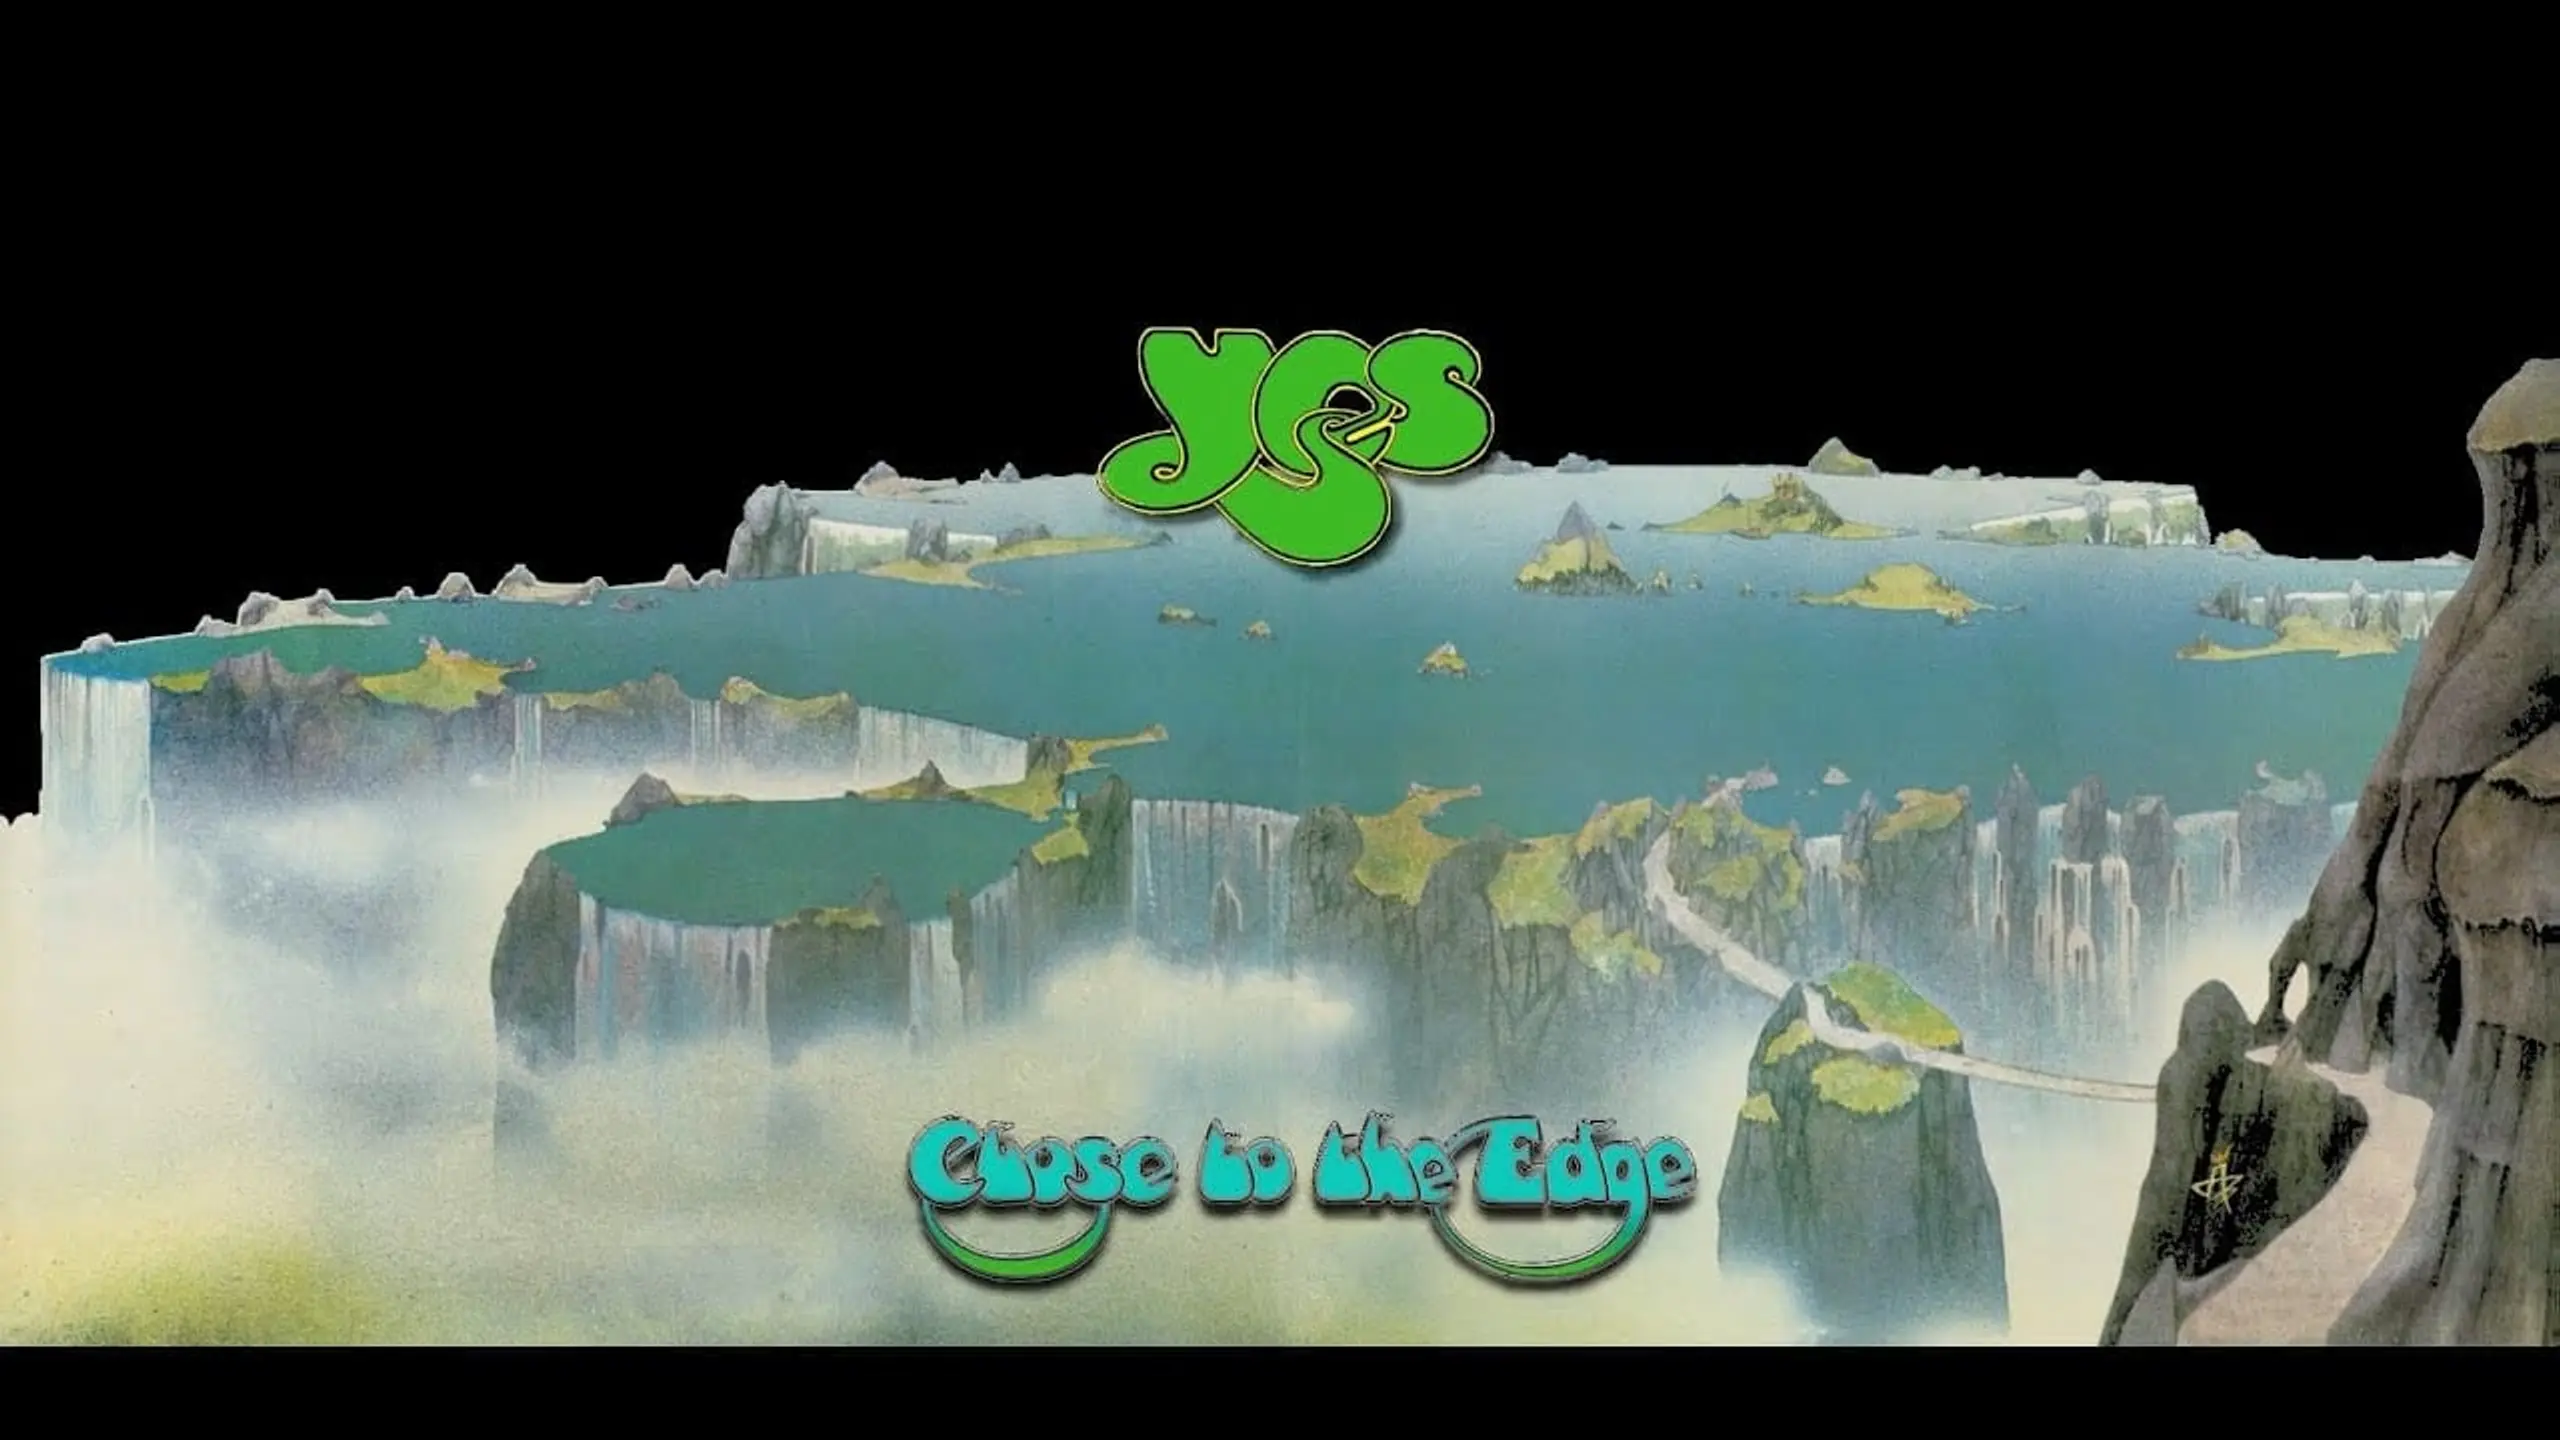 Yes: Close to the Edge